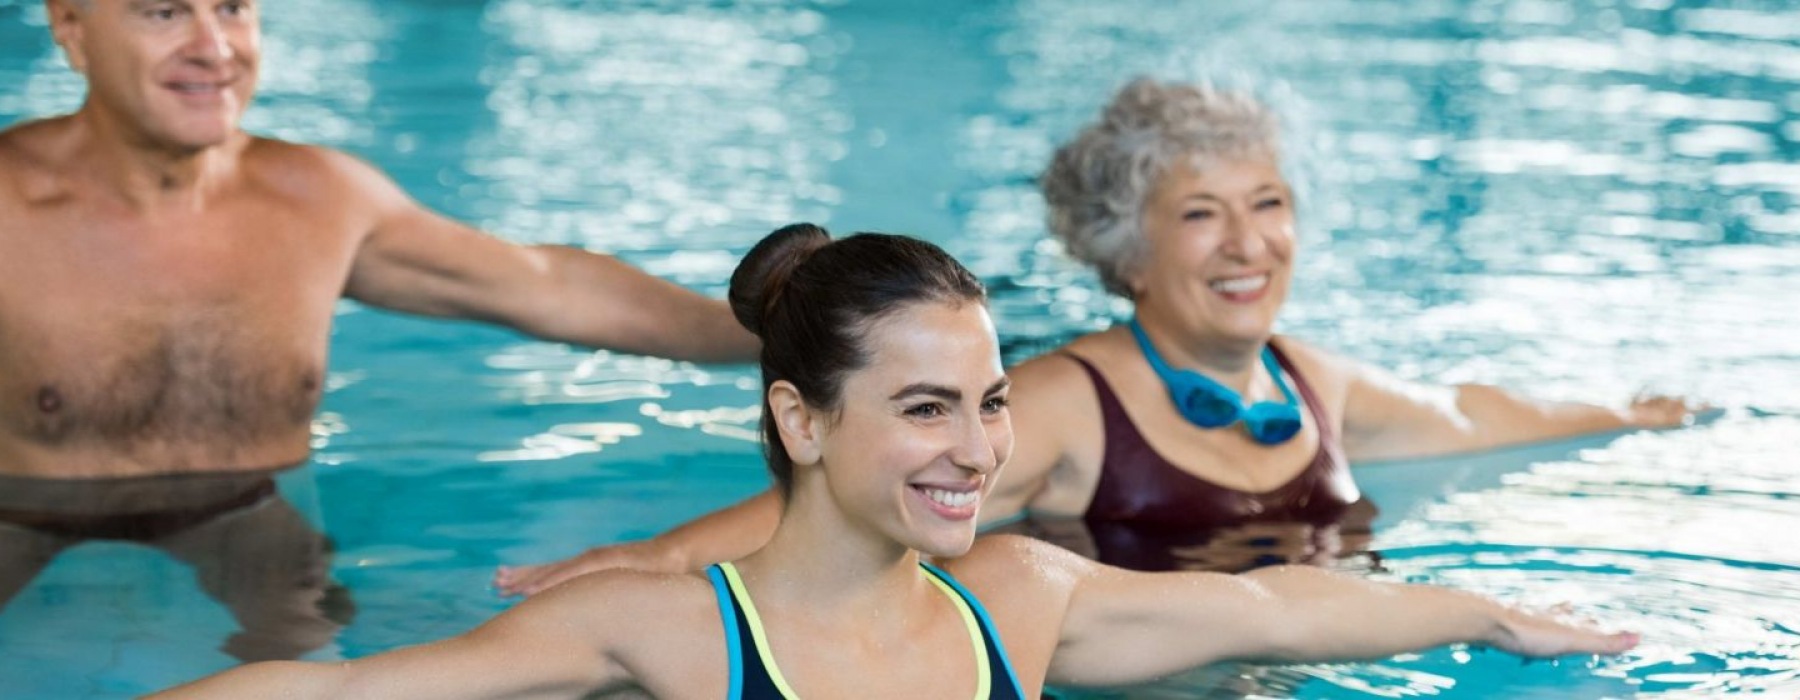 Swimming Exercises for Active Adults by Larkspur at Creekside